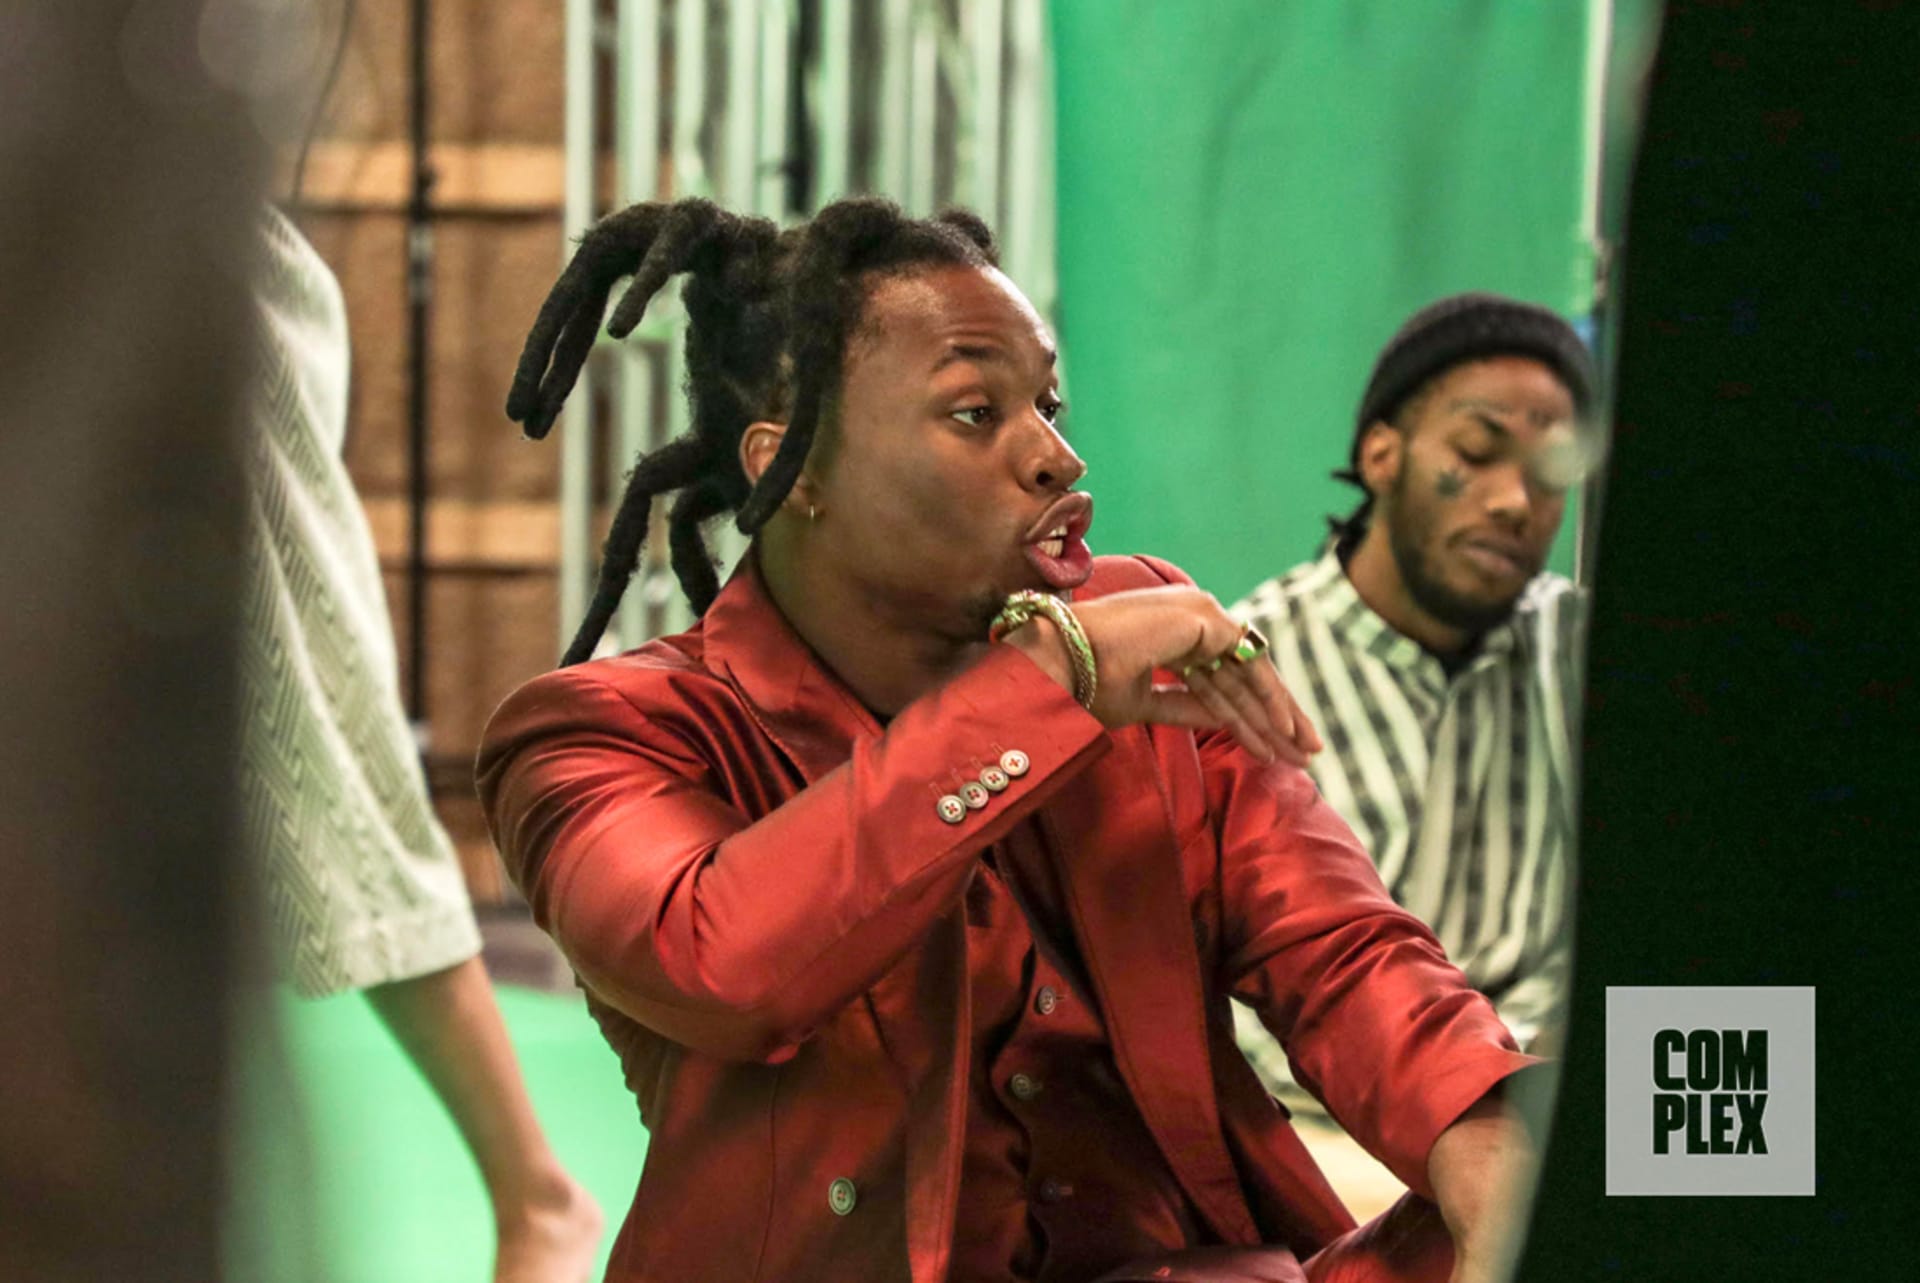 Denzel Curry at the "Black Balloons" music video shoot.